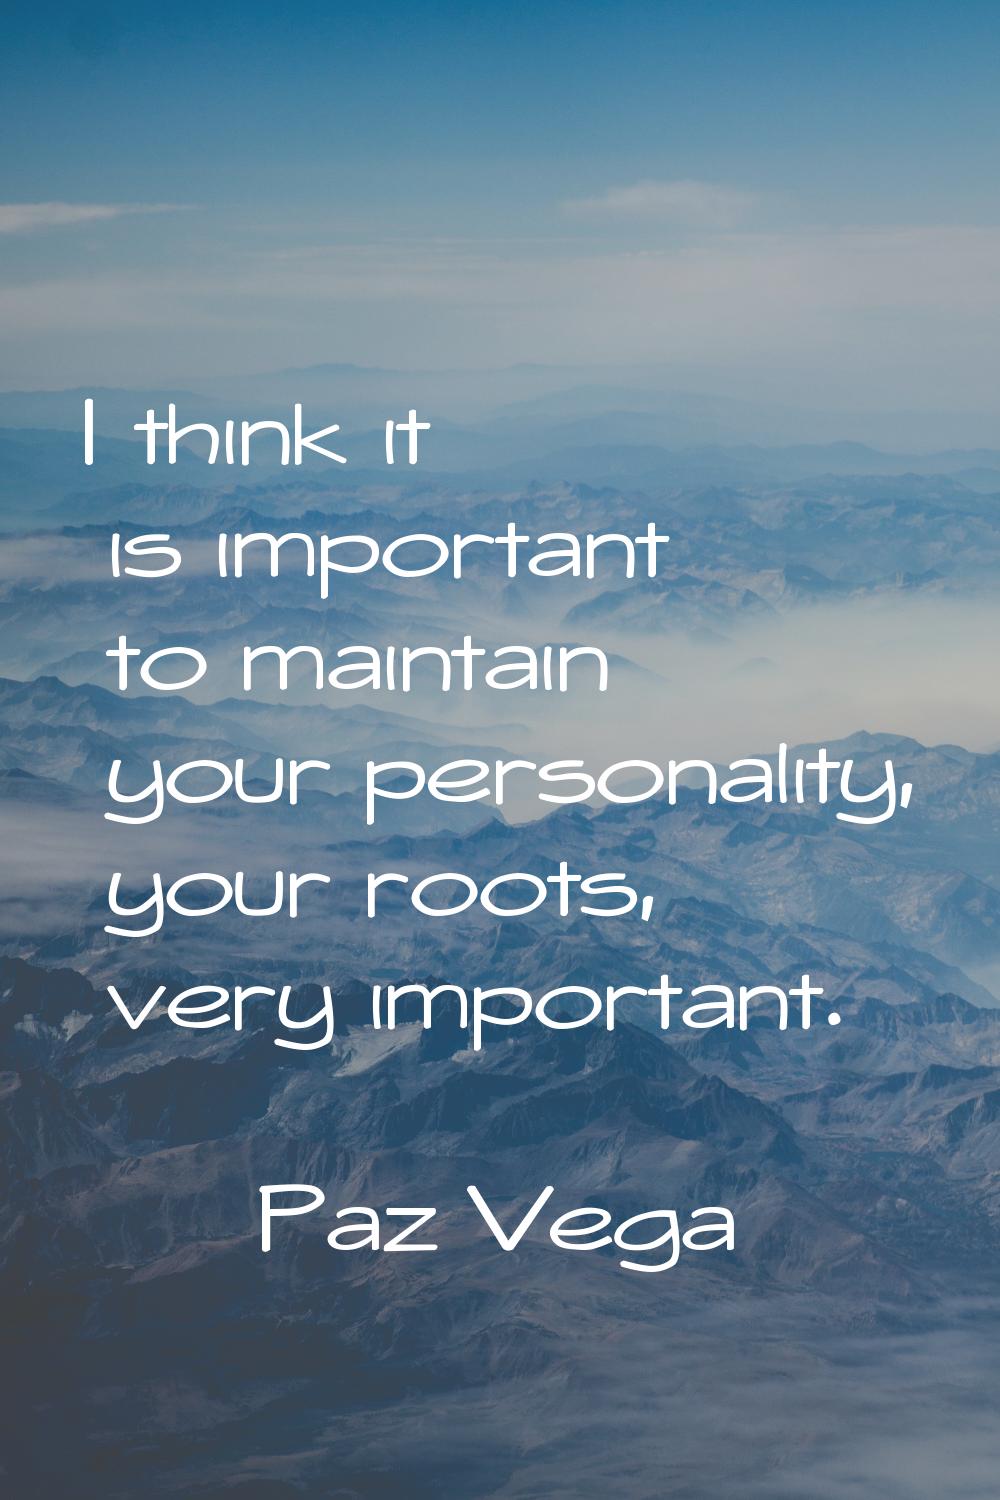 I think it is important to maintain your personality, your roots, very important.